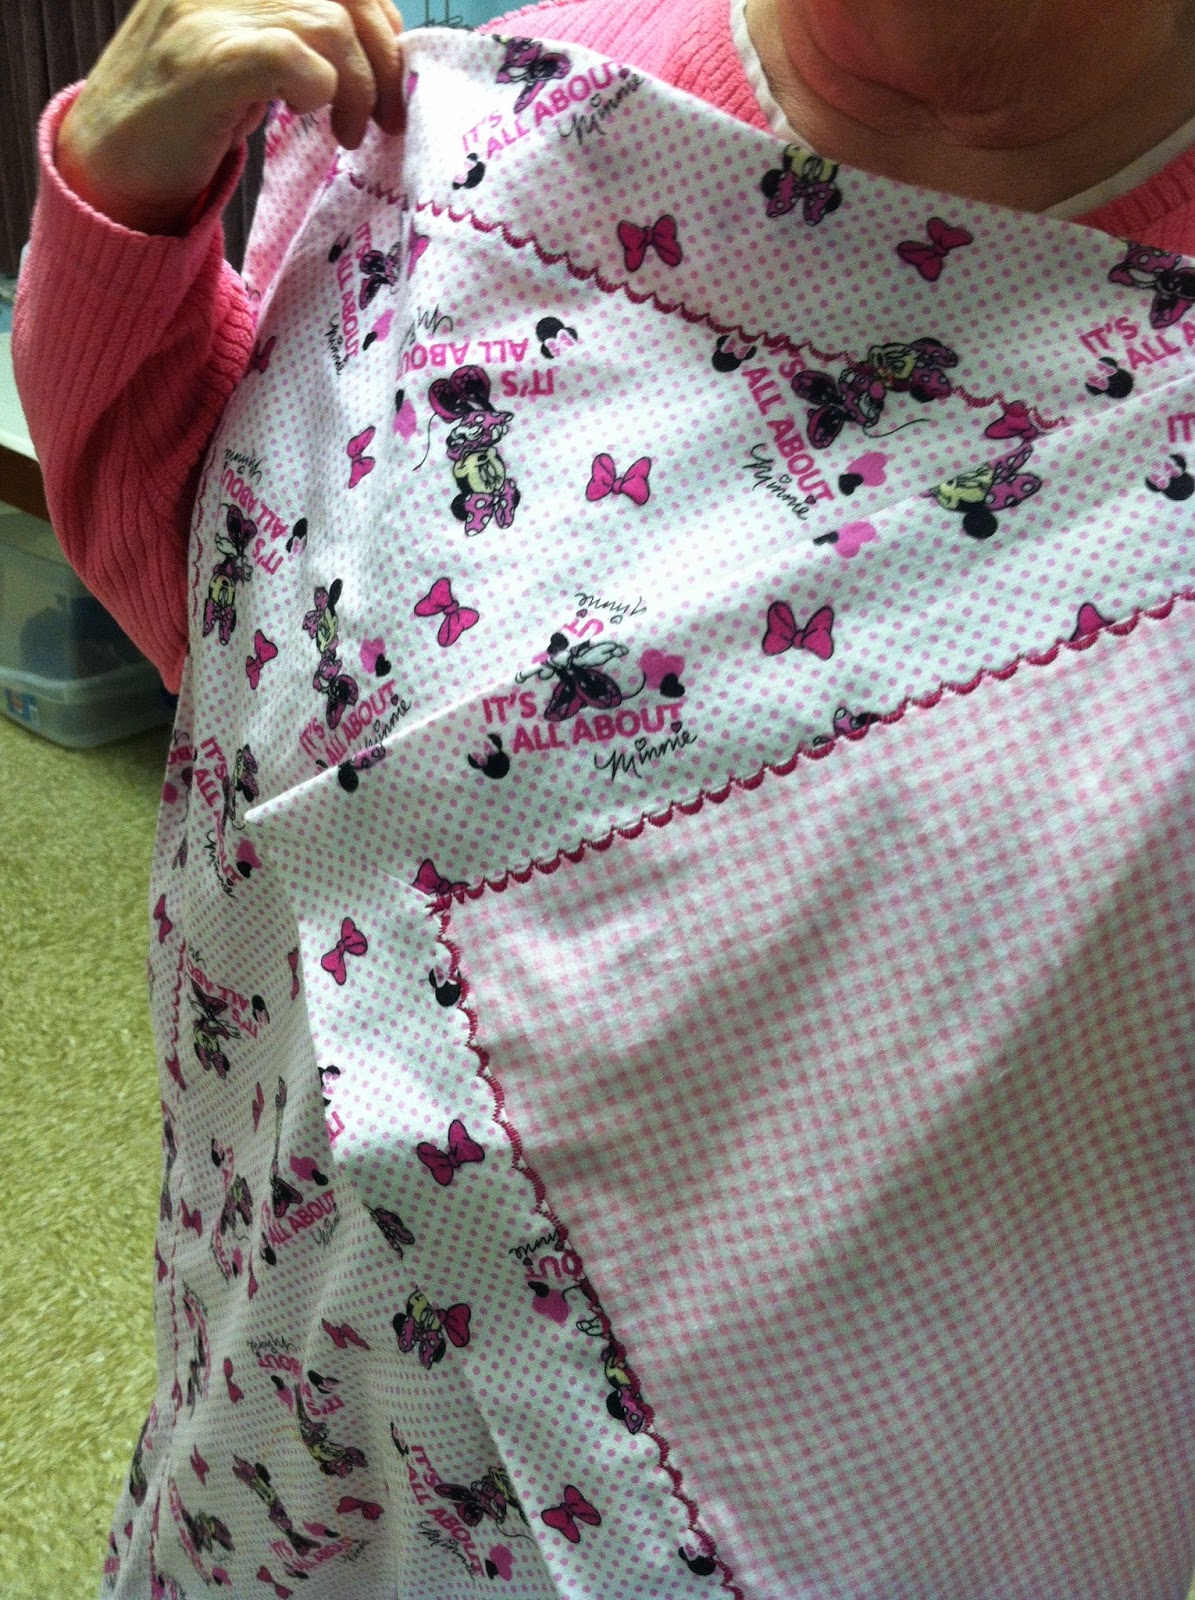 Old Bags Day - Sewing with Friends